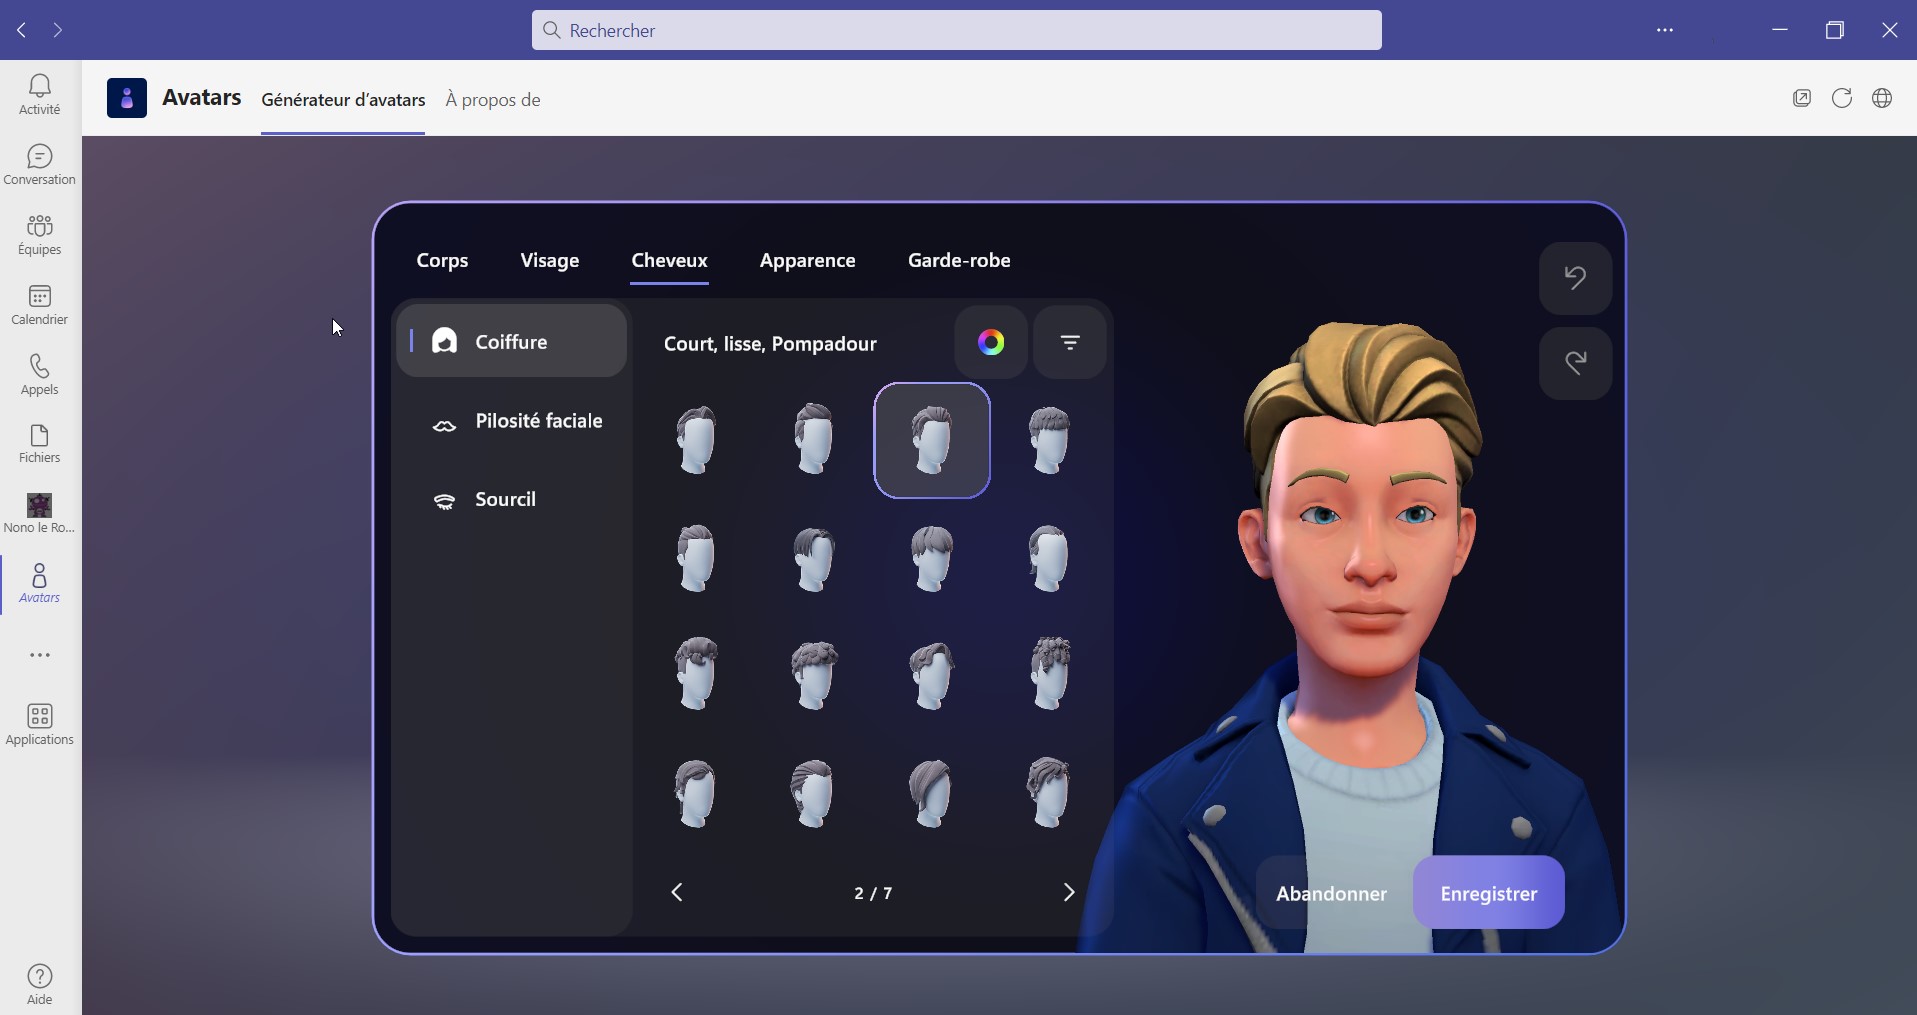 How Mesh Avatars Improve Your Presence in Teams Meetings